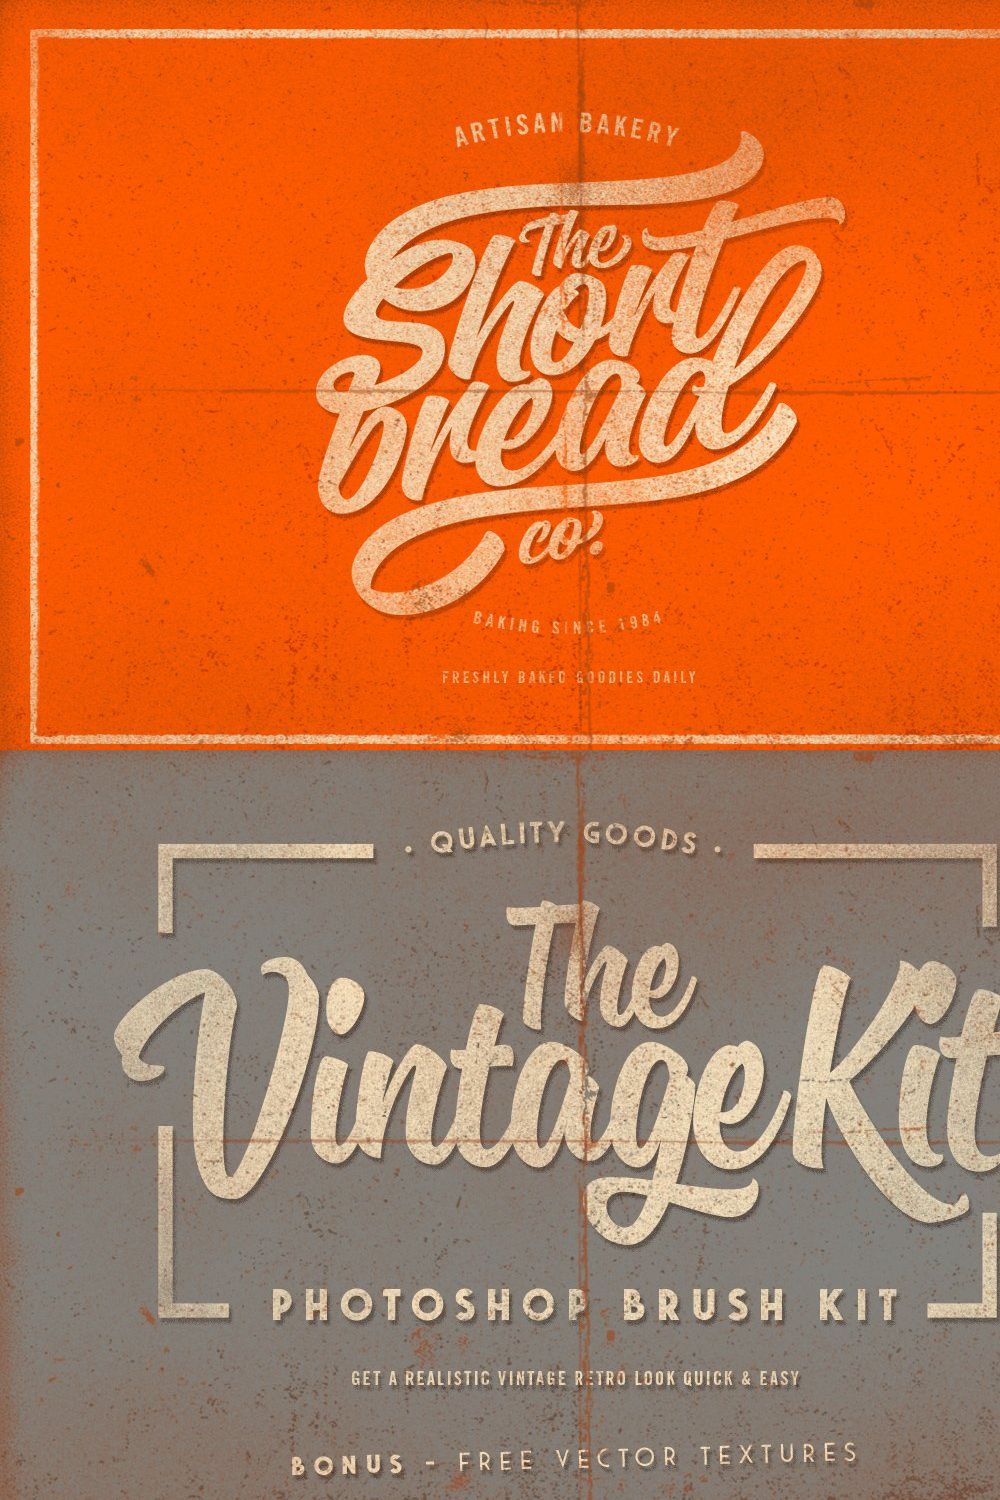 The Vintage Kit - Photoshop Brushes pinterest preview image.